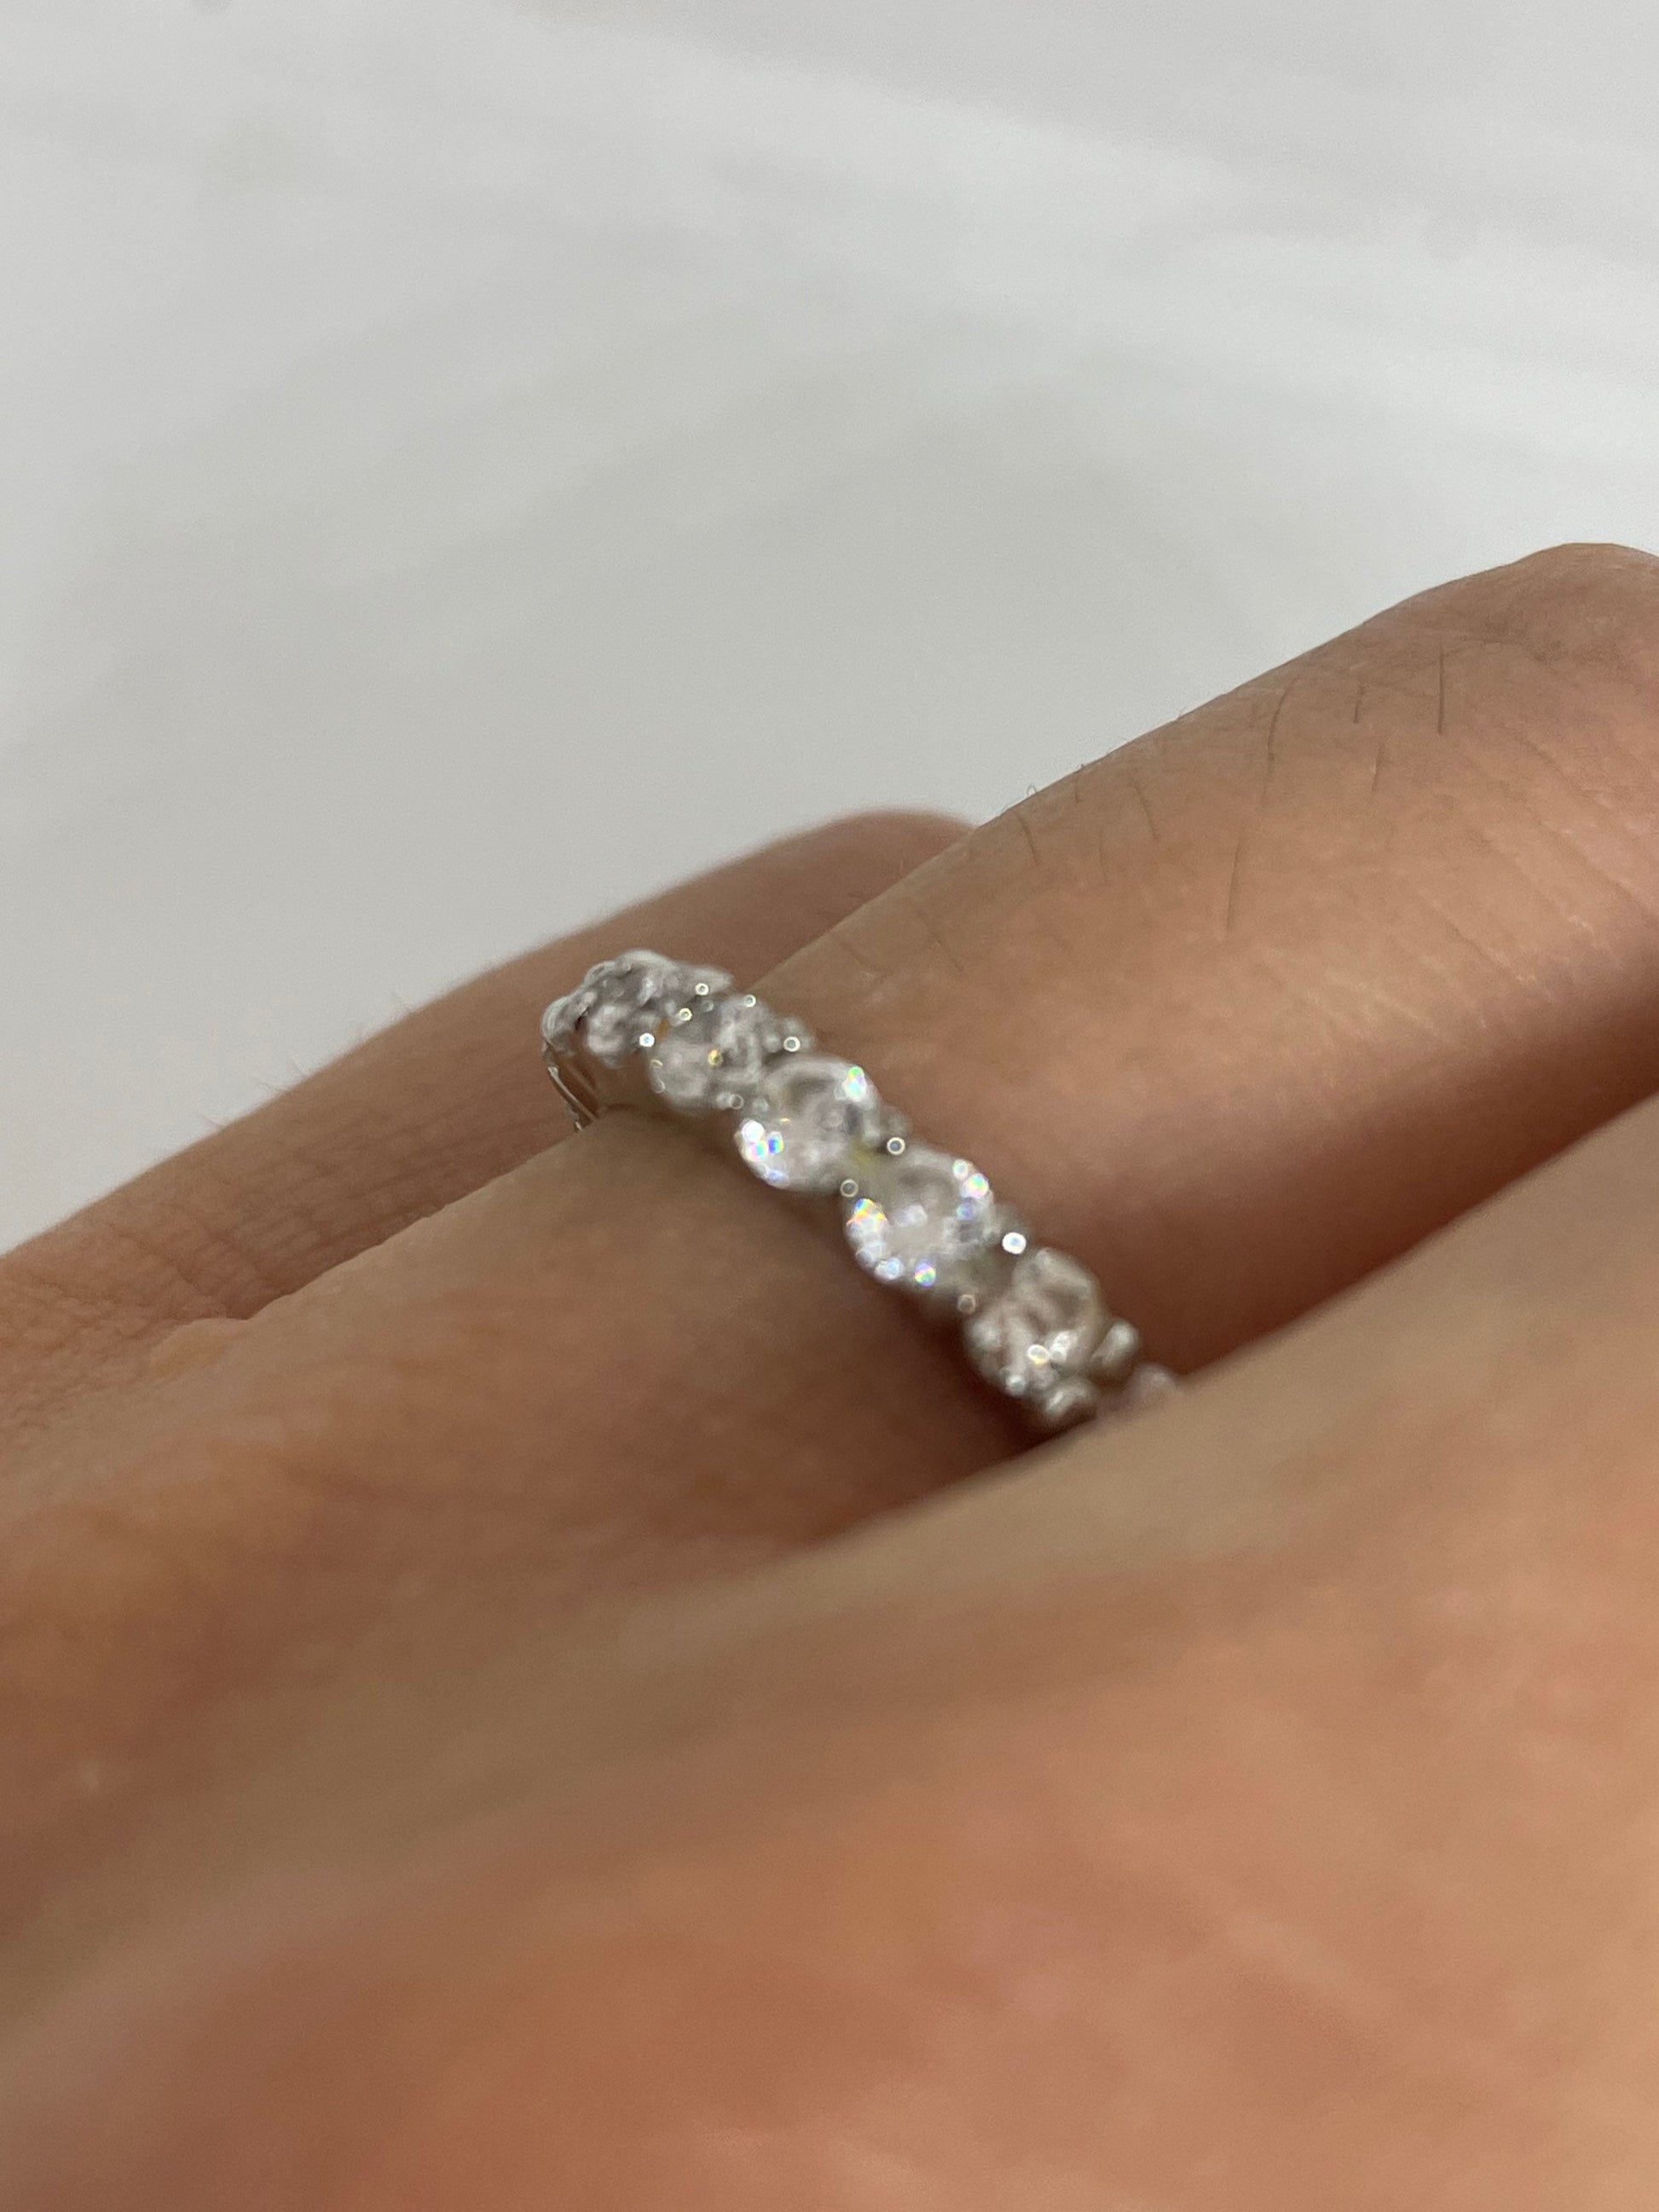 Vintage Cubic Zirconia Crystal Sterling Silver Eternity Band Ring